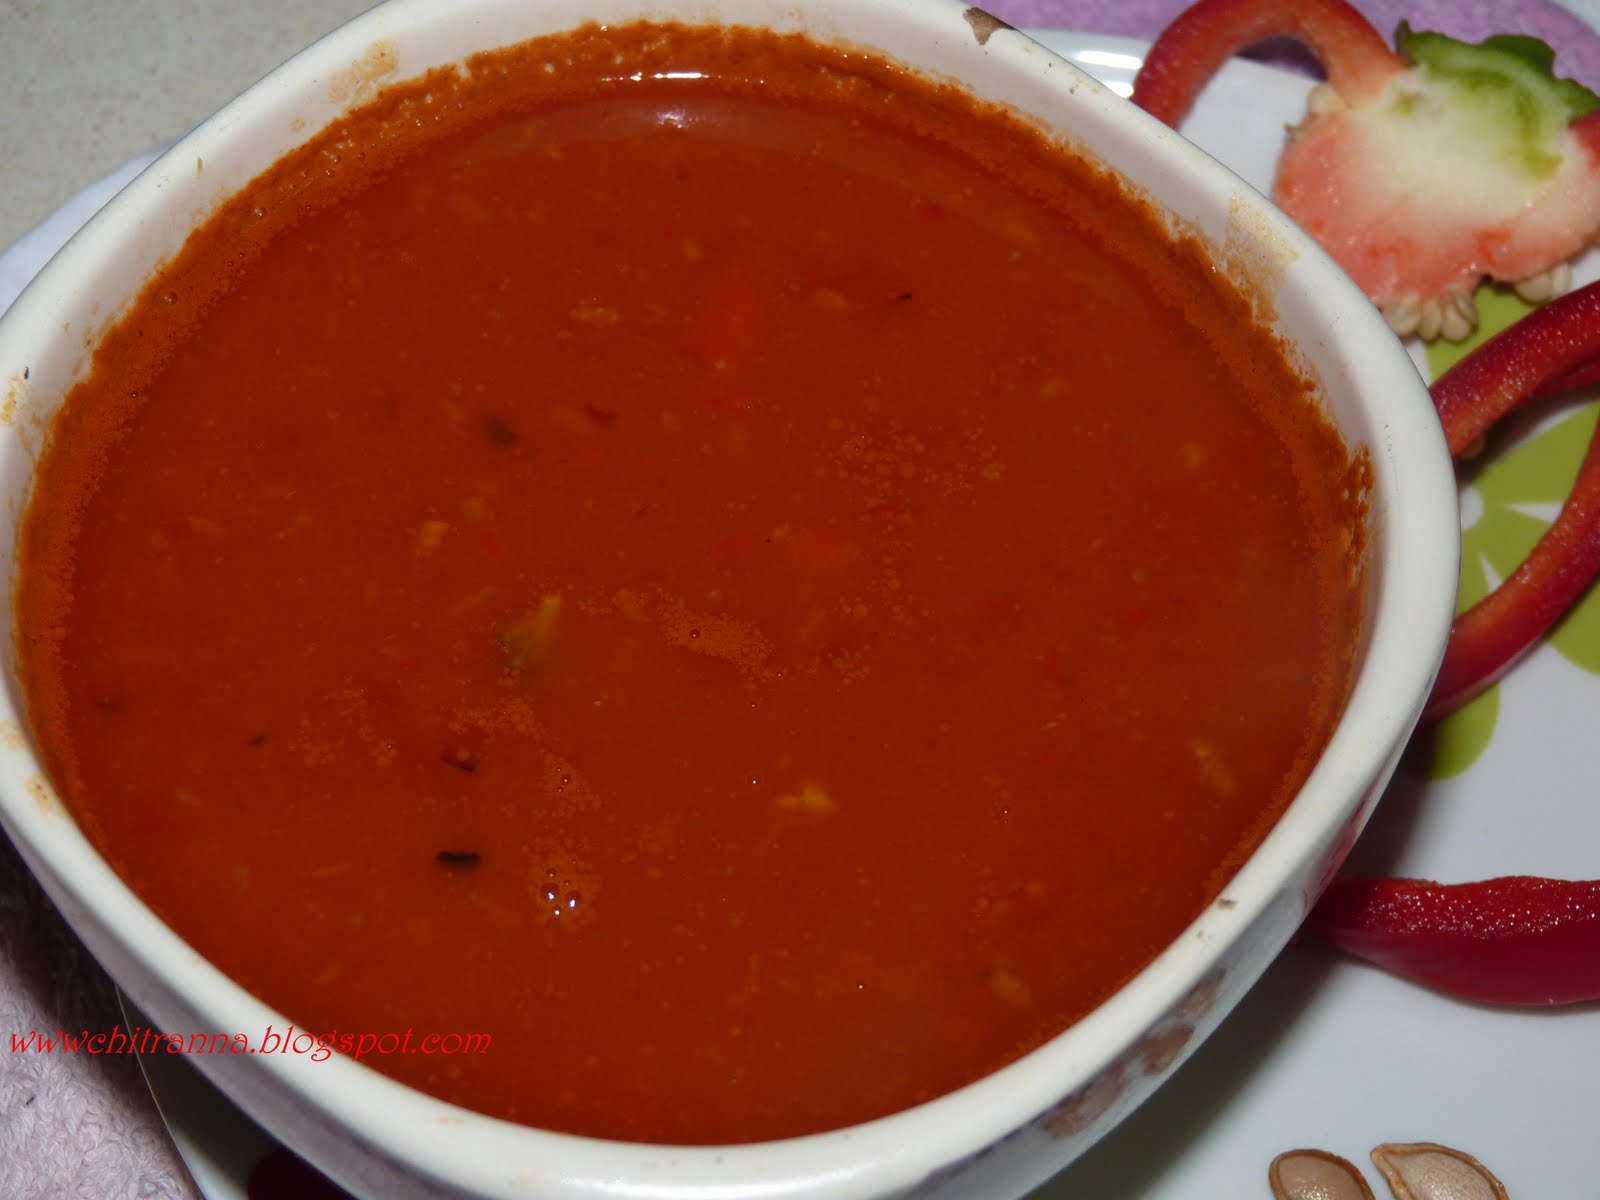 Chitranna: Butternut Squash And Red Pepper Soup